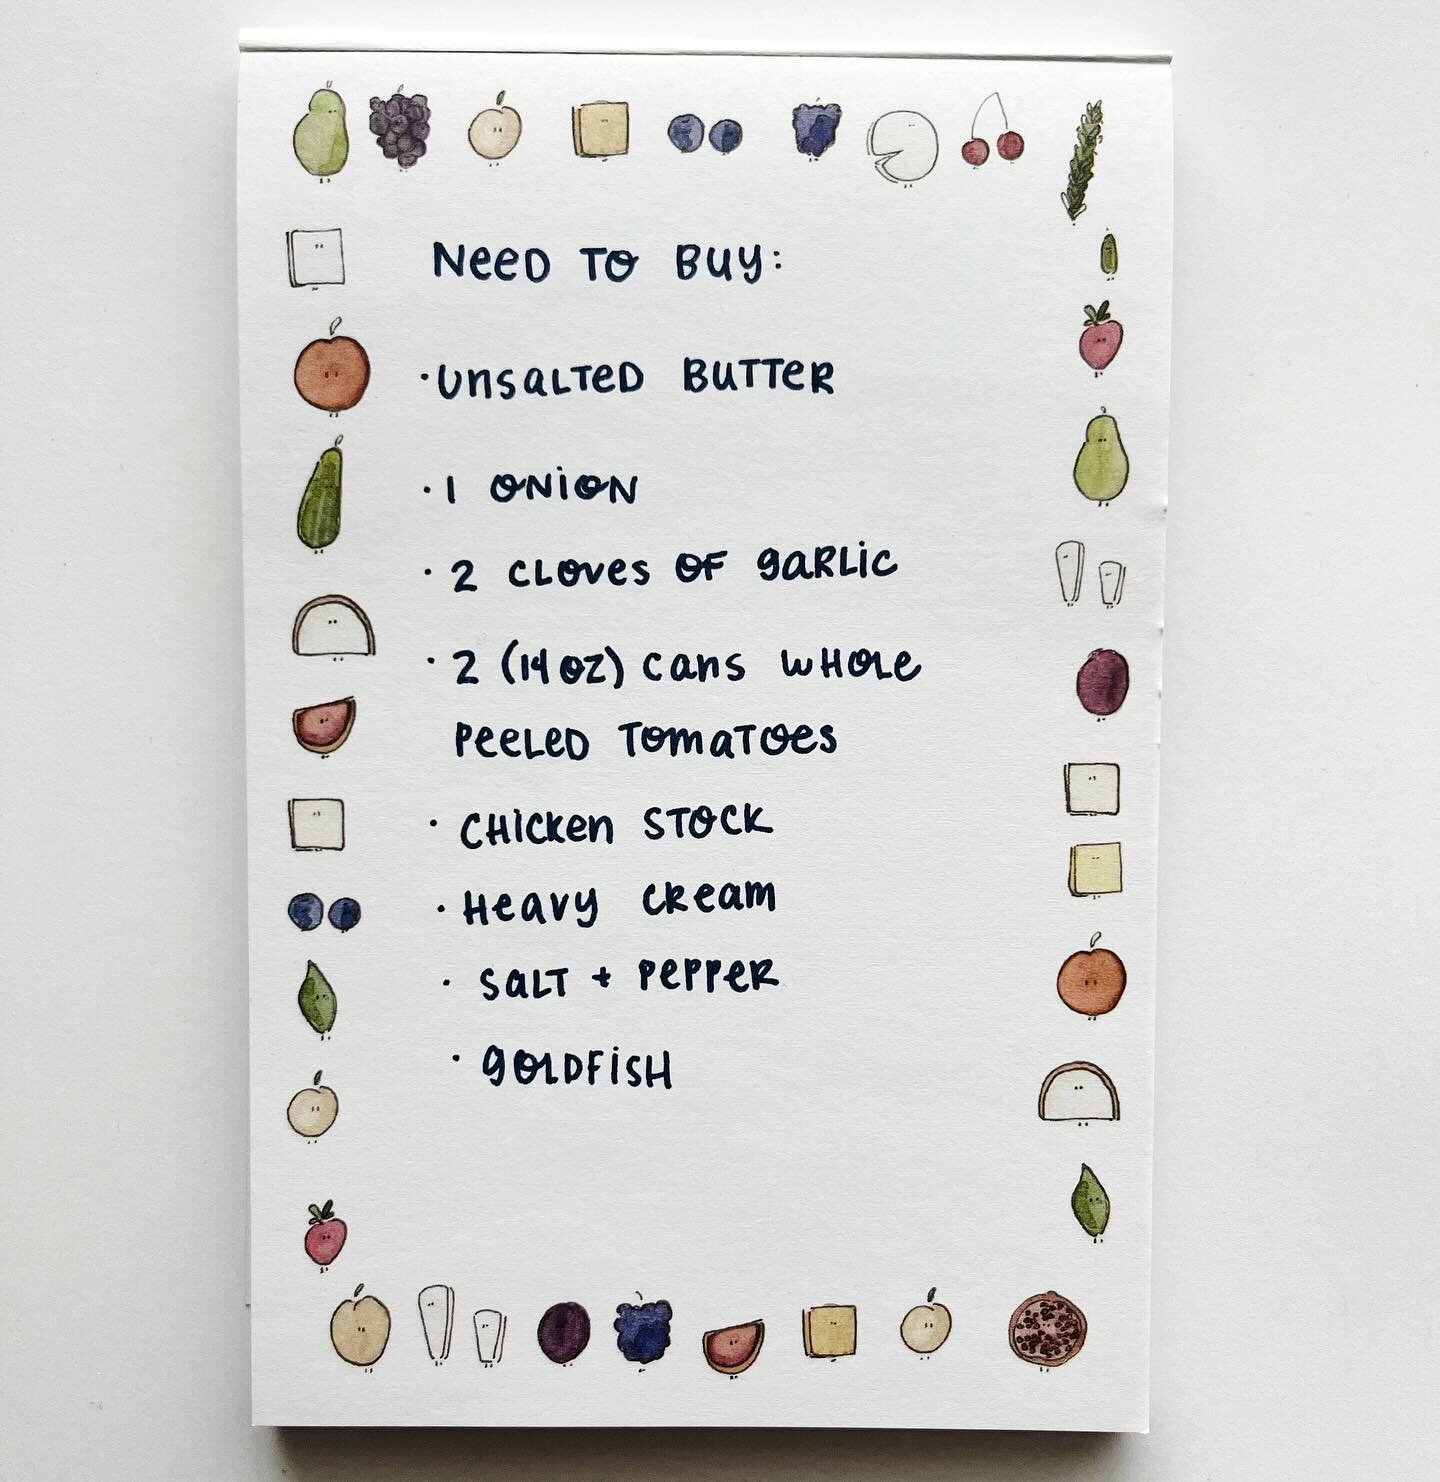 My foodie notepad seemed perfect for making my grocery list for a cozy meal - can you guess what it&rsquo;ll be? ✨

View more at watercoloratx.com/notepads